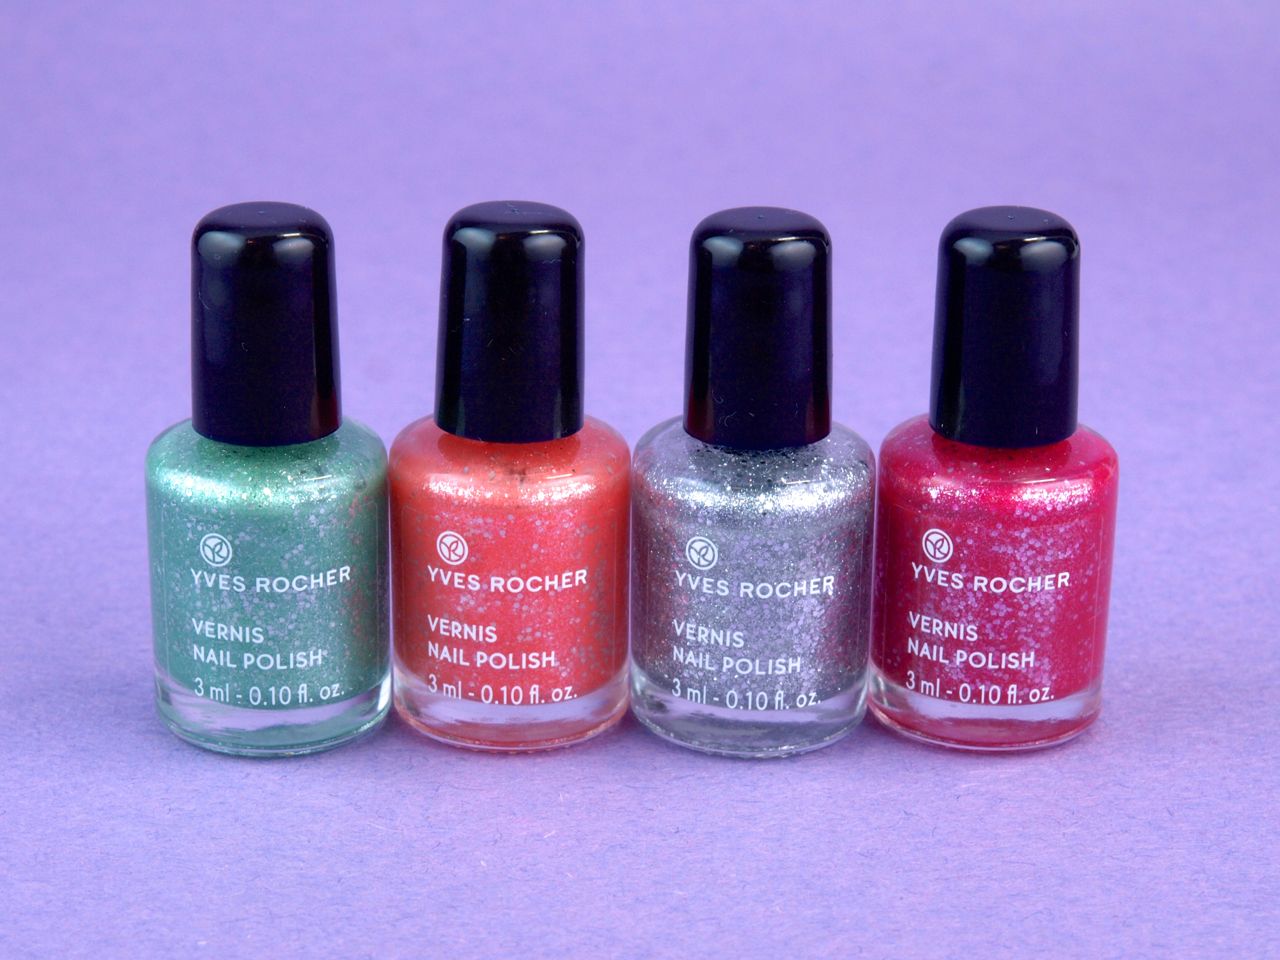 Yves Rocher Holiday 2014 Shimmery Makeup Collection: Review and Swatches